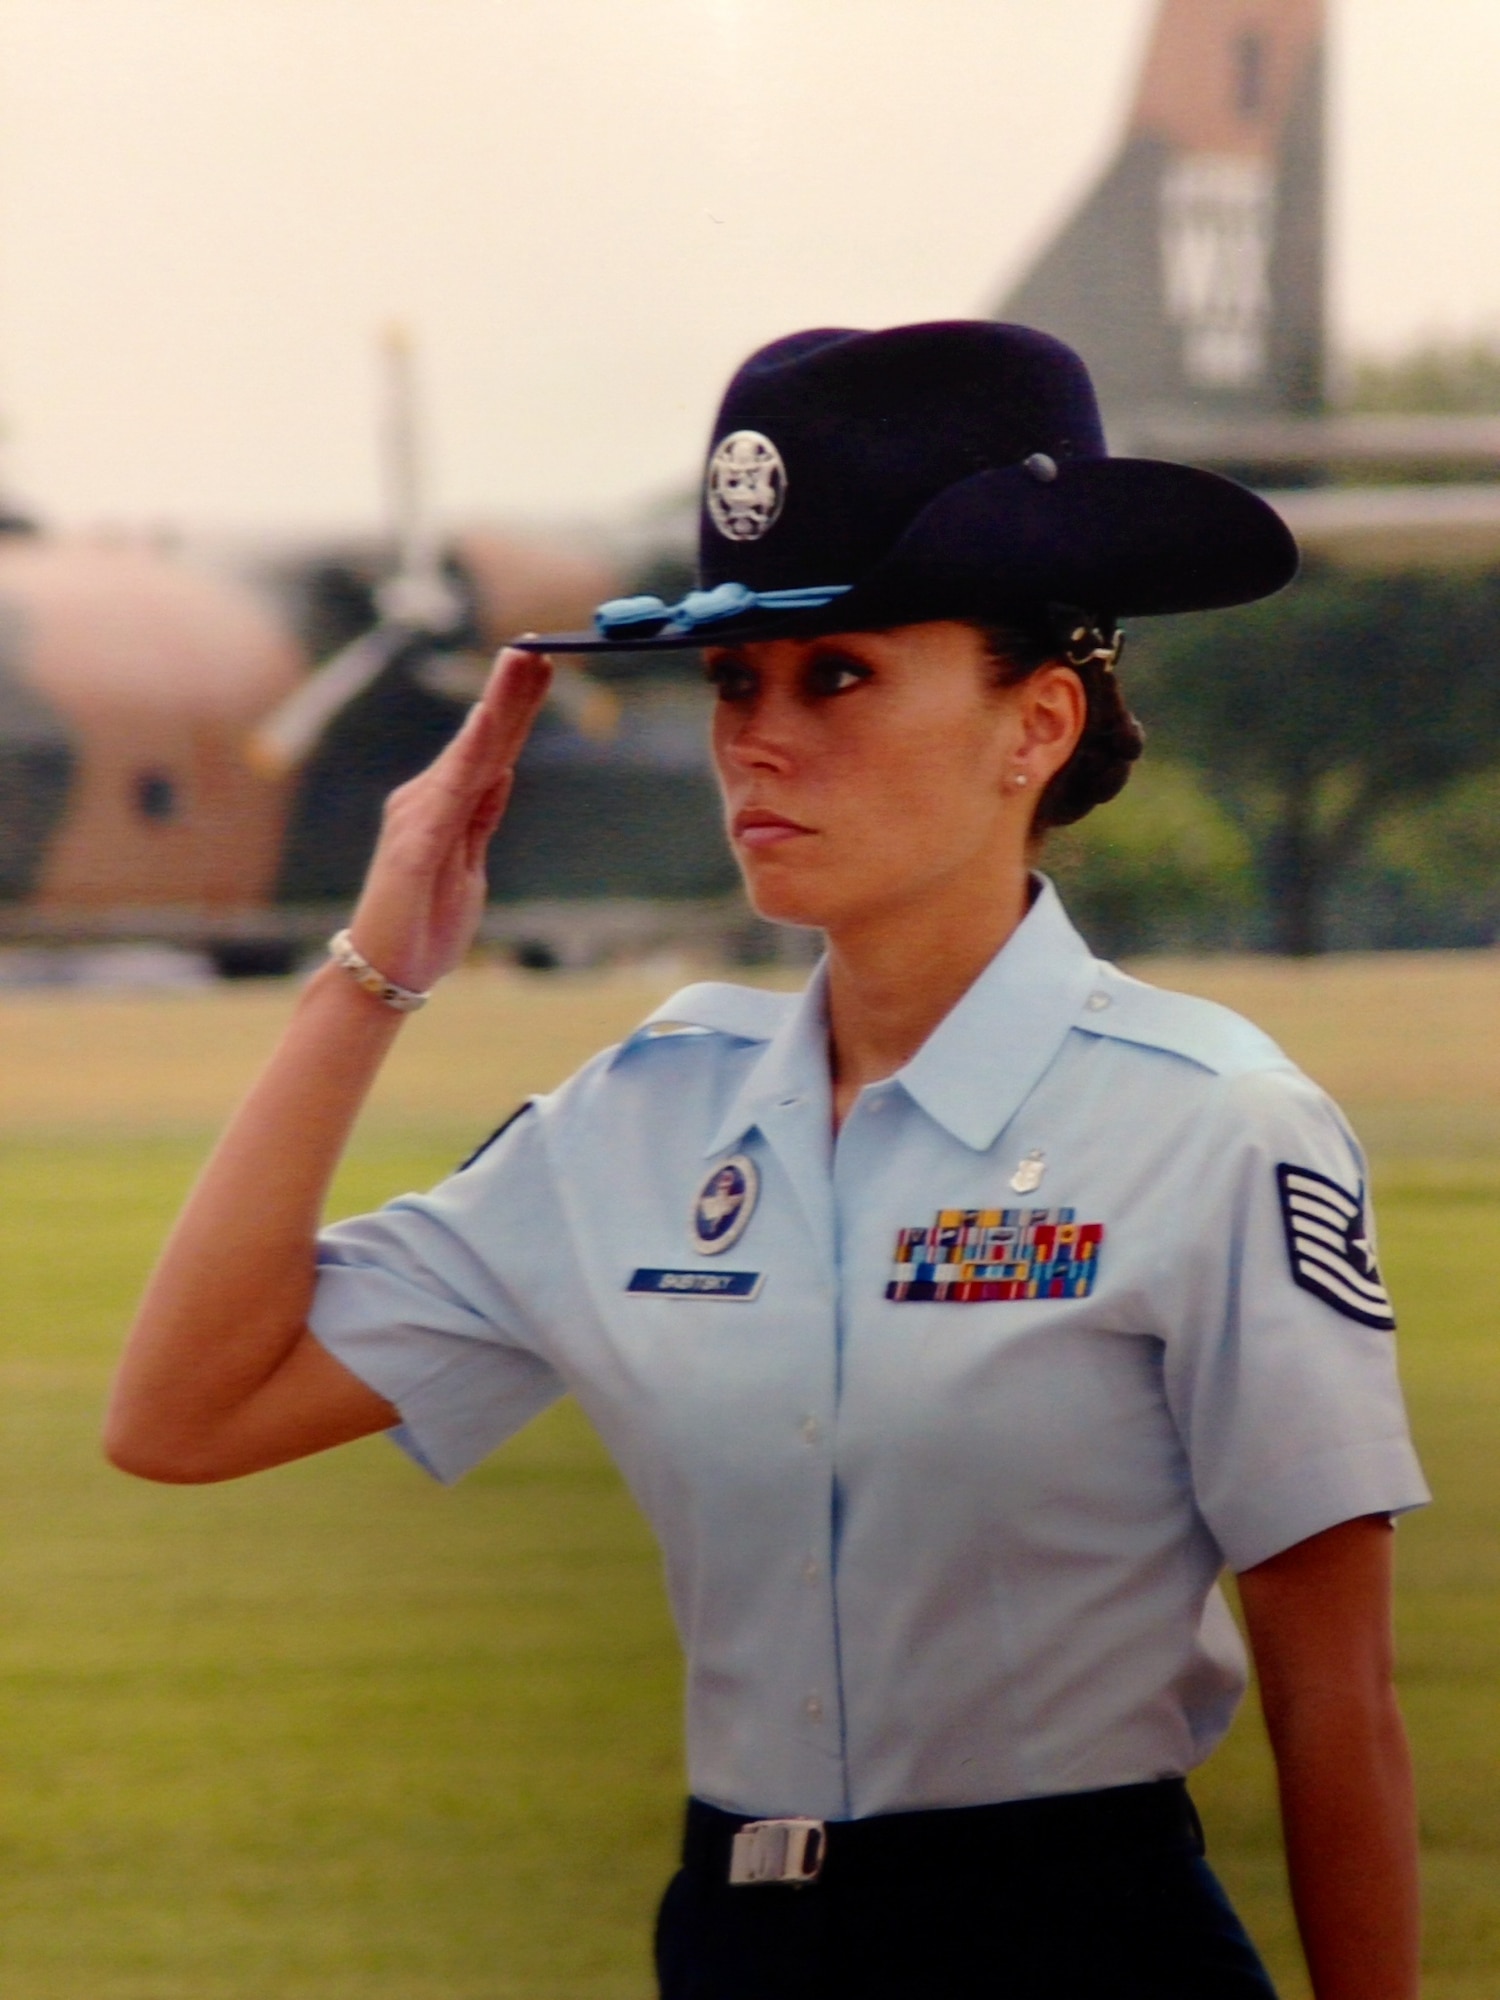 Senior Master Sgt. Hope Skibitsky is seen as a technical sergeant and military training instructor earlier in her career. Skibitsky spent more than four years training recruits in the 2000s, preparing them for their Air Force careers. (courtesy photo)